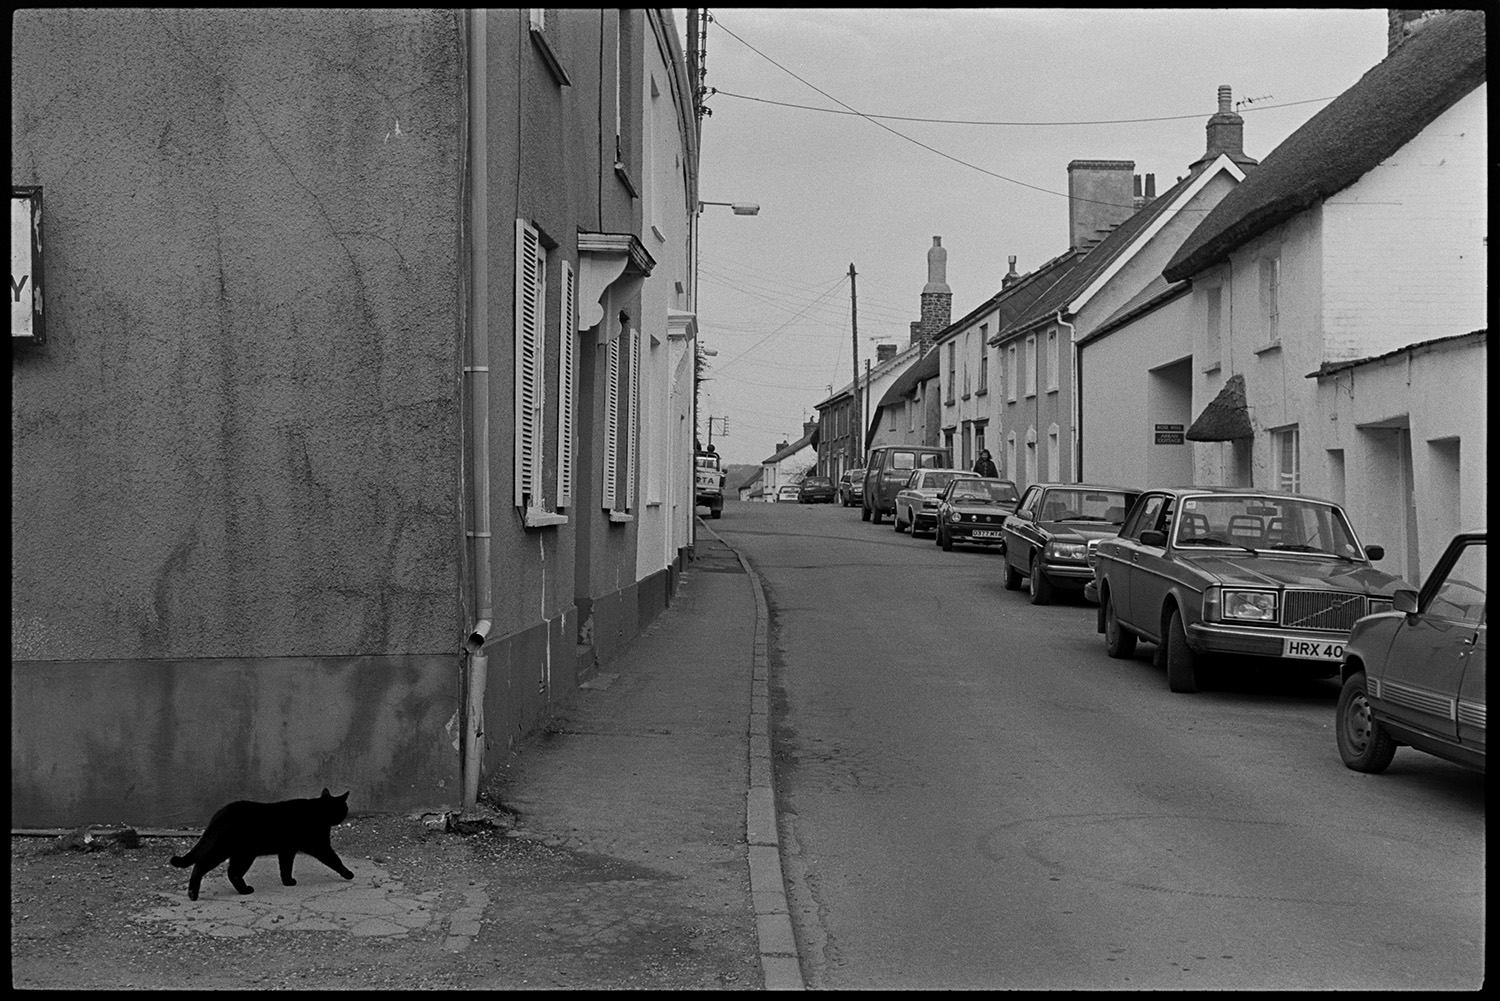 Street scenes with motorbikes.
[A black cat walking along a pavement past cottages and parked cars in a street in Chulmleigh.]